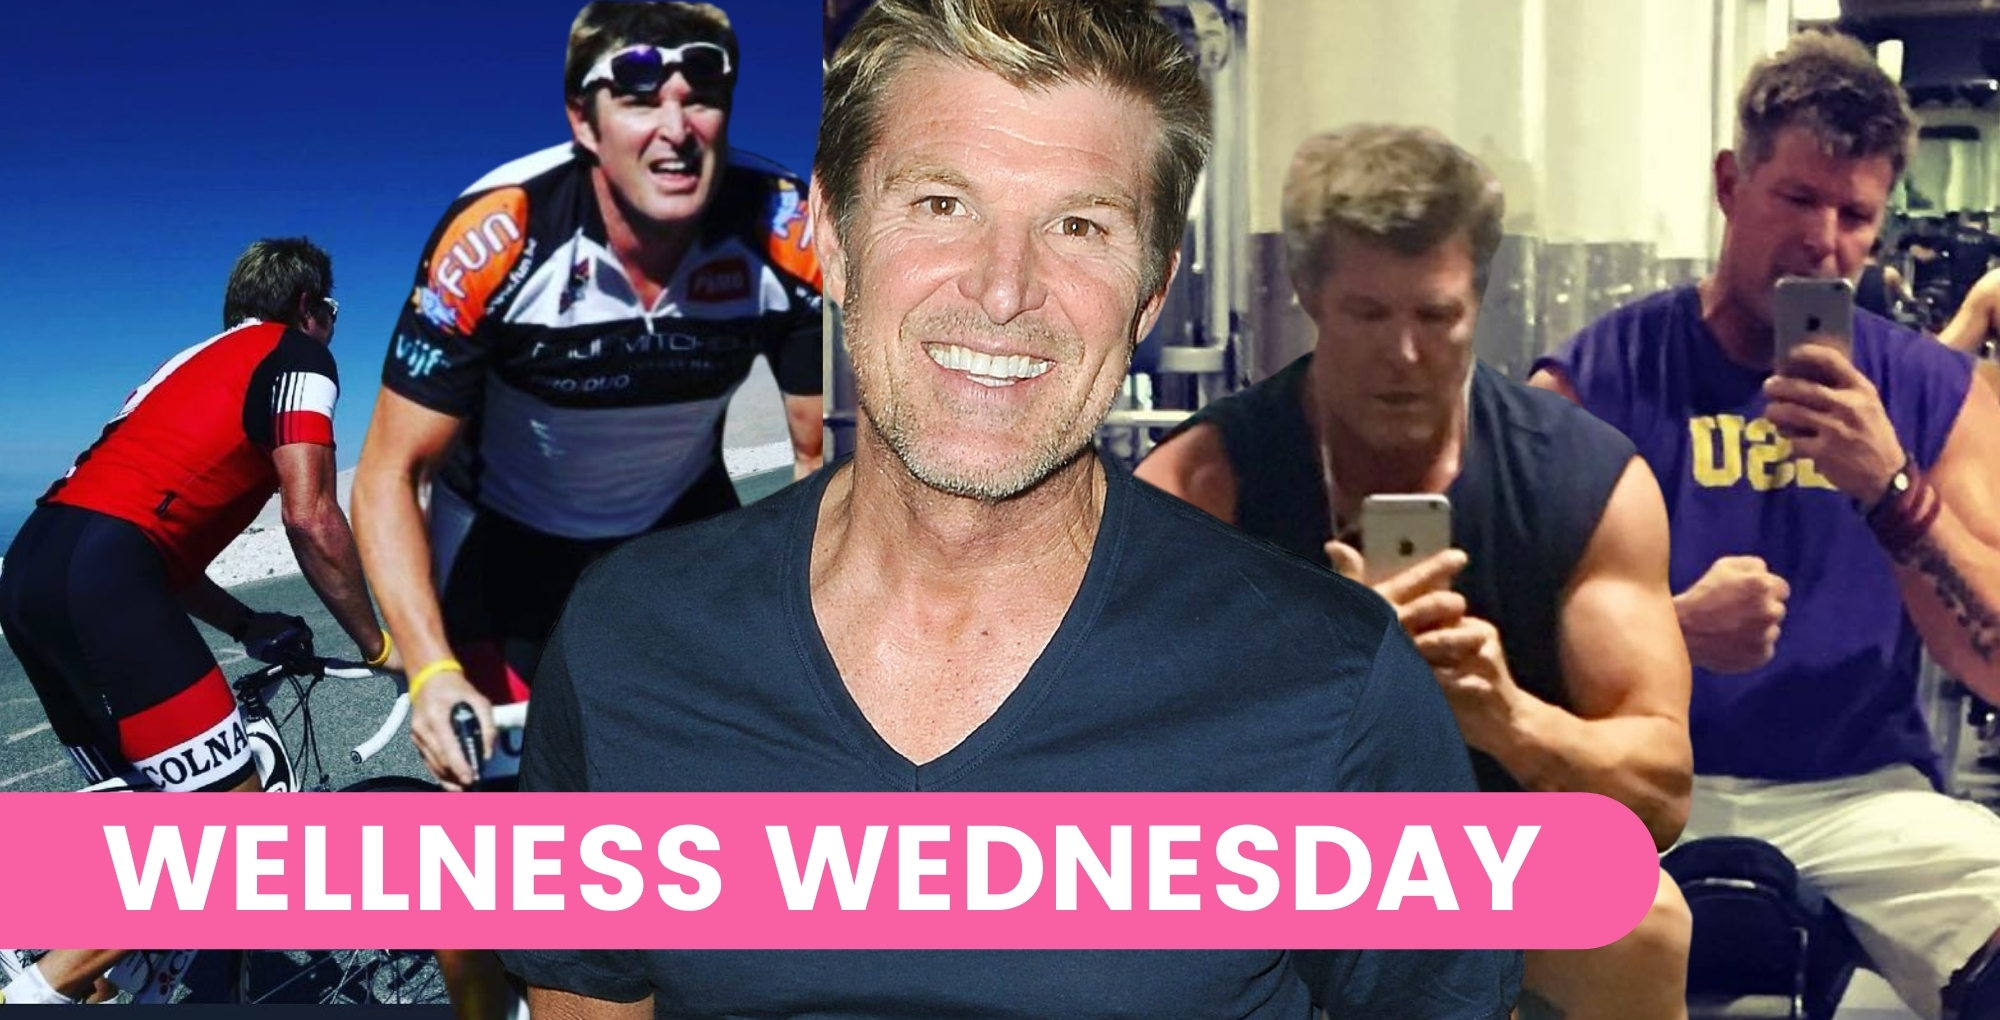 the bold and the beautiful star winsor harmon wellness wednesday.